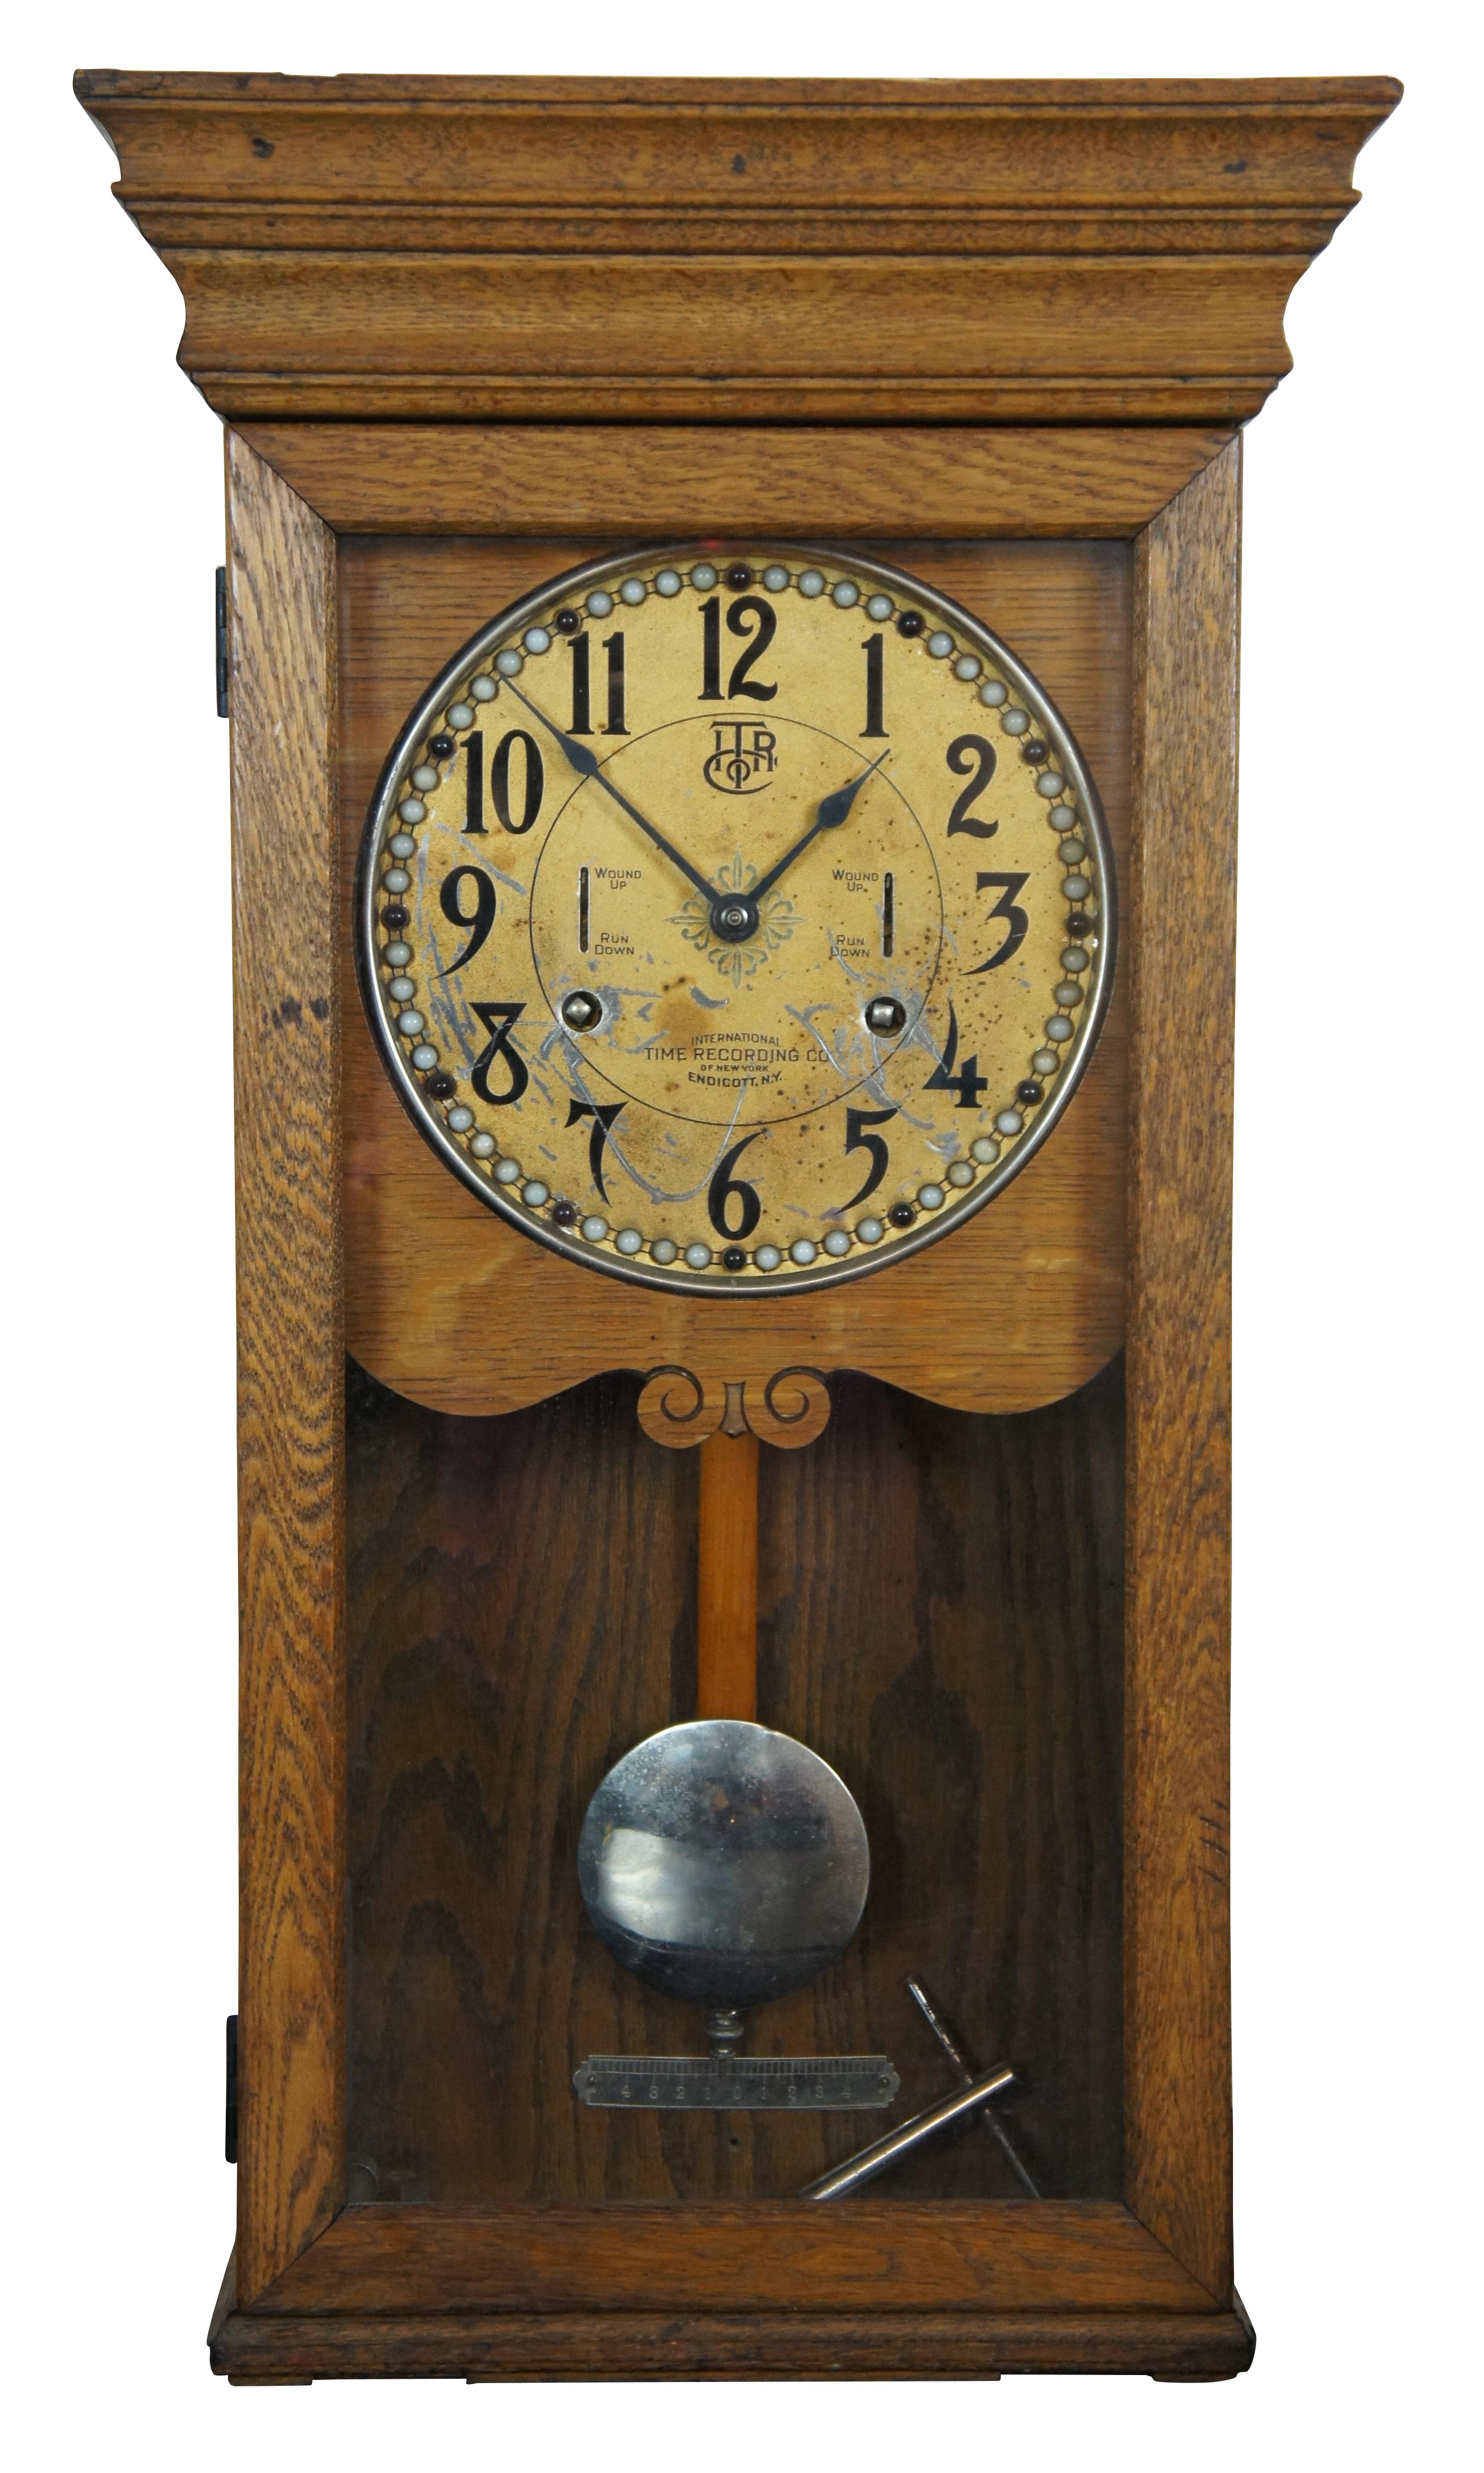 Antique early 20th century oak cased wall hanging clock by the International Time Recording Company of Endicott, New York. Gold painted face is bordered with red and white gemstones. Size: 31